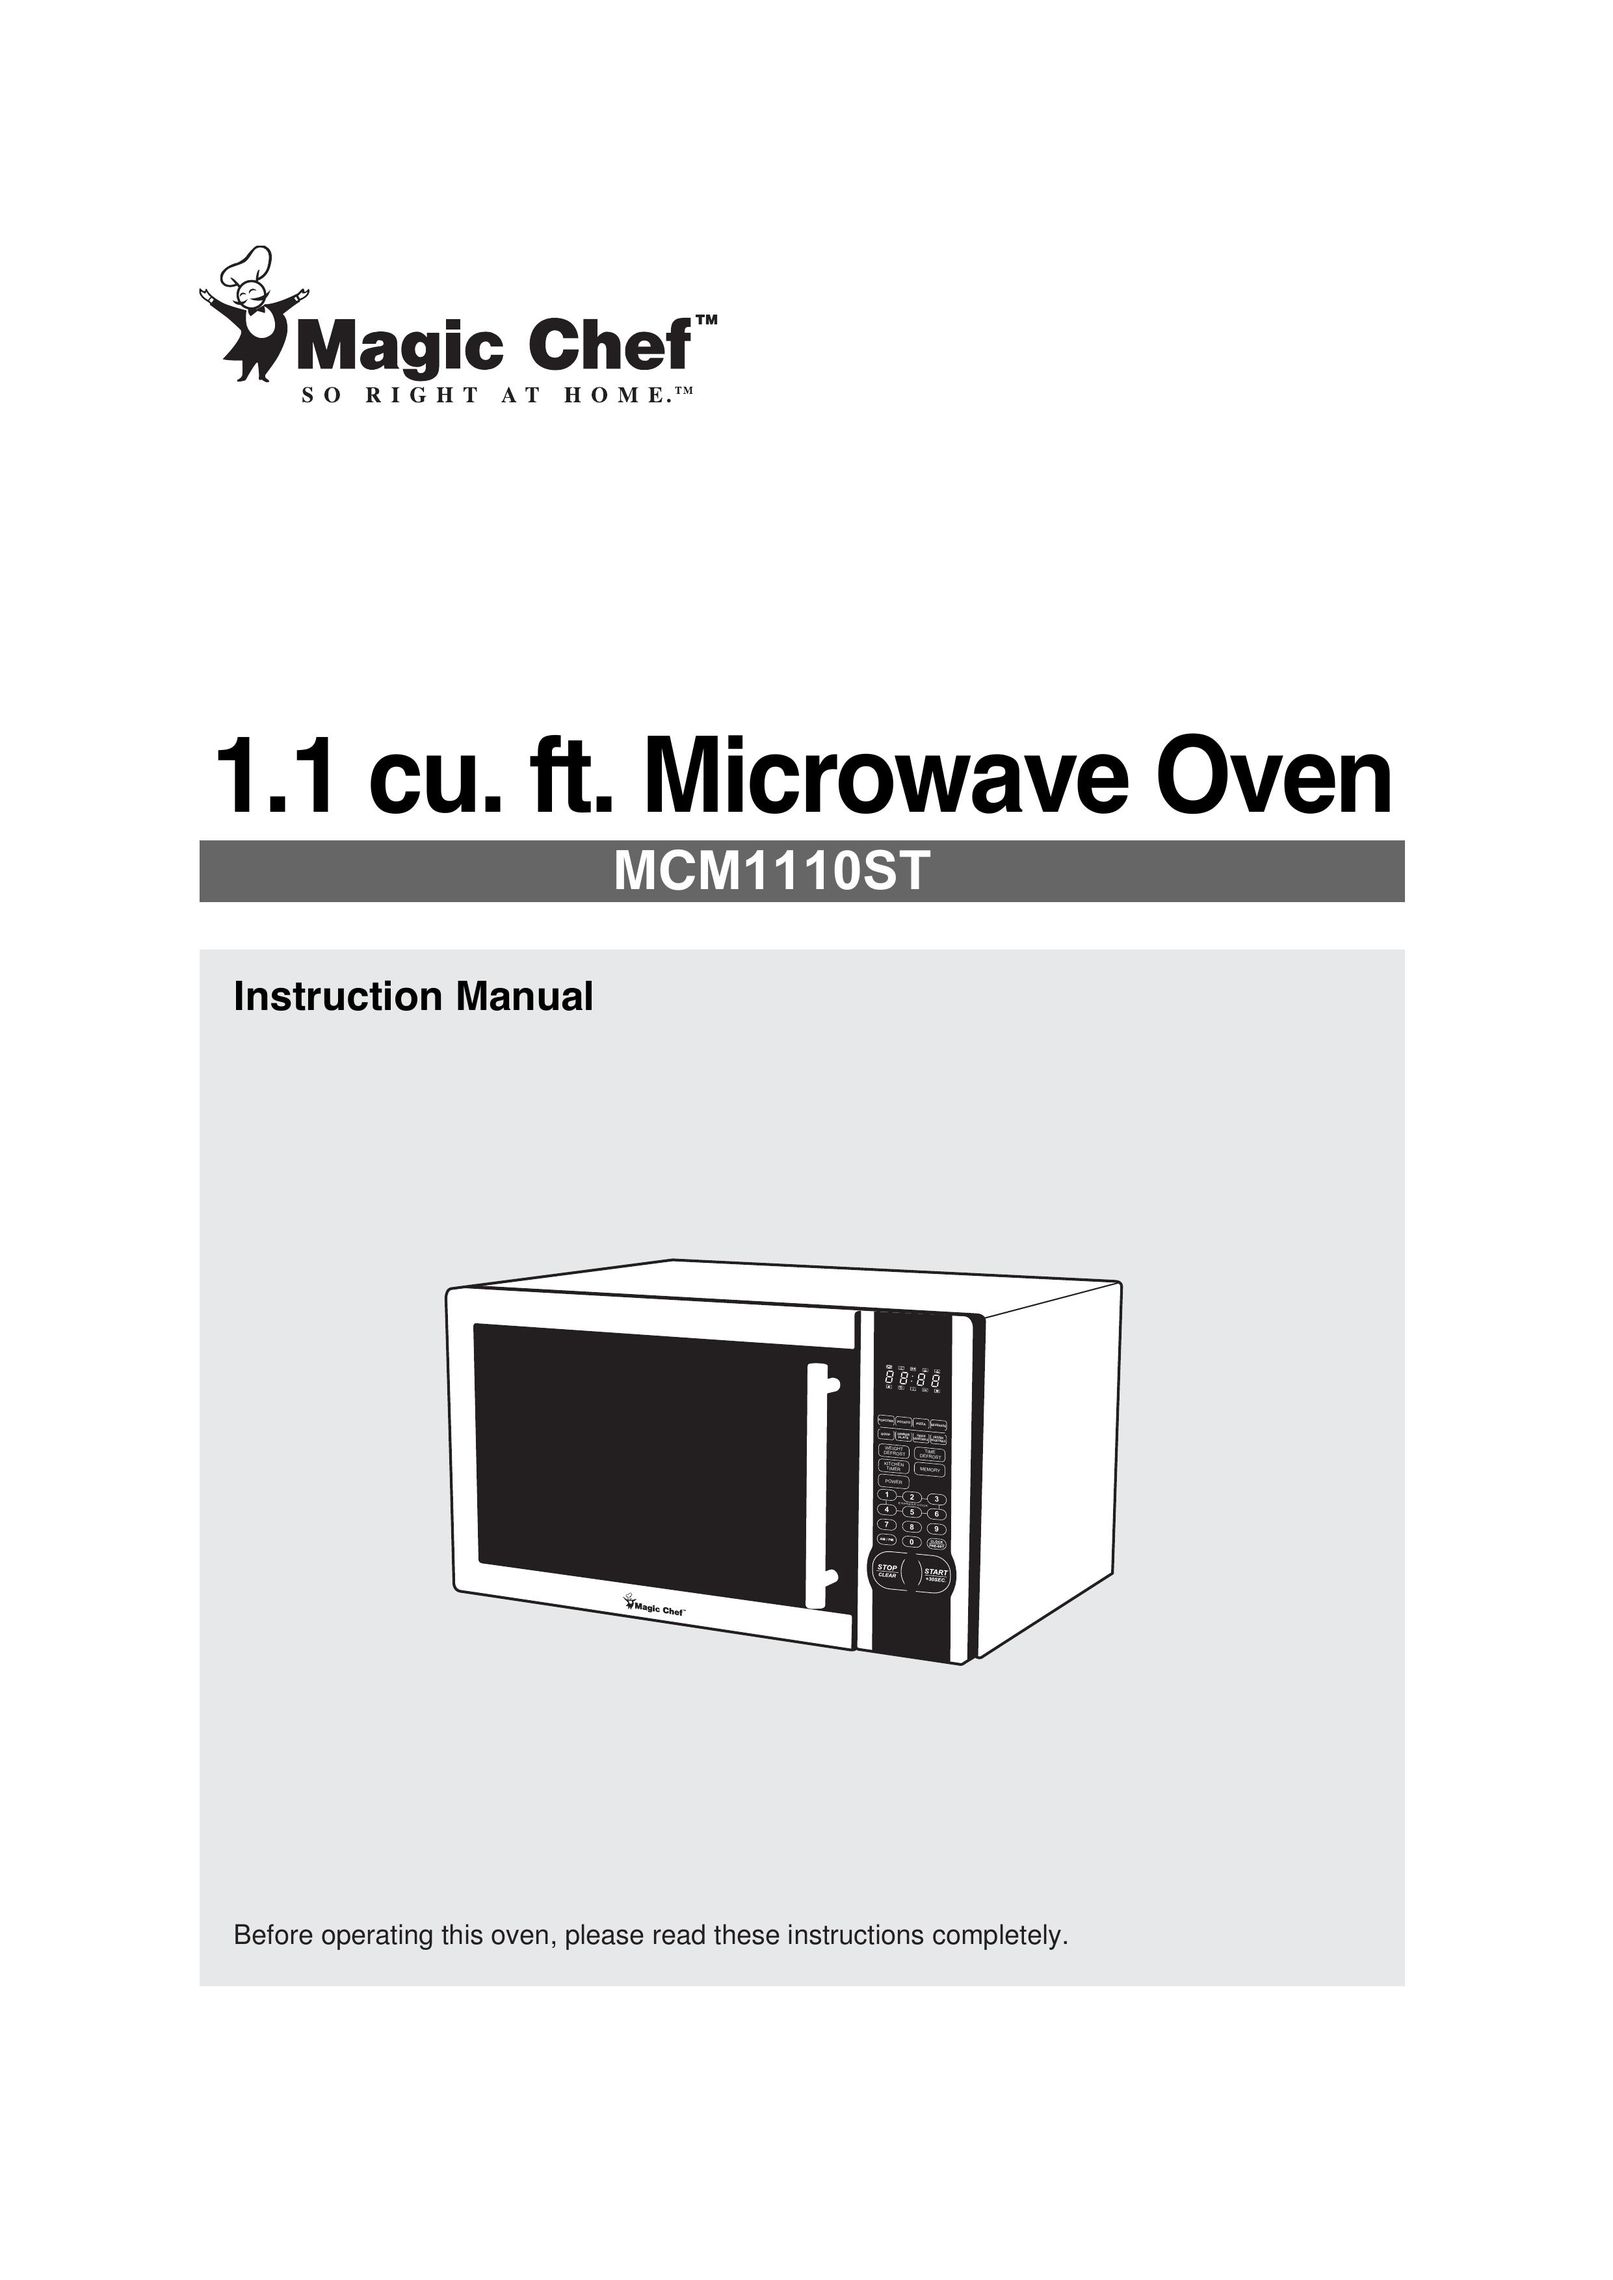 Magic Chef MCM1110ST Microwave Oven User Manual